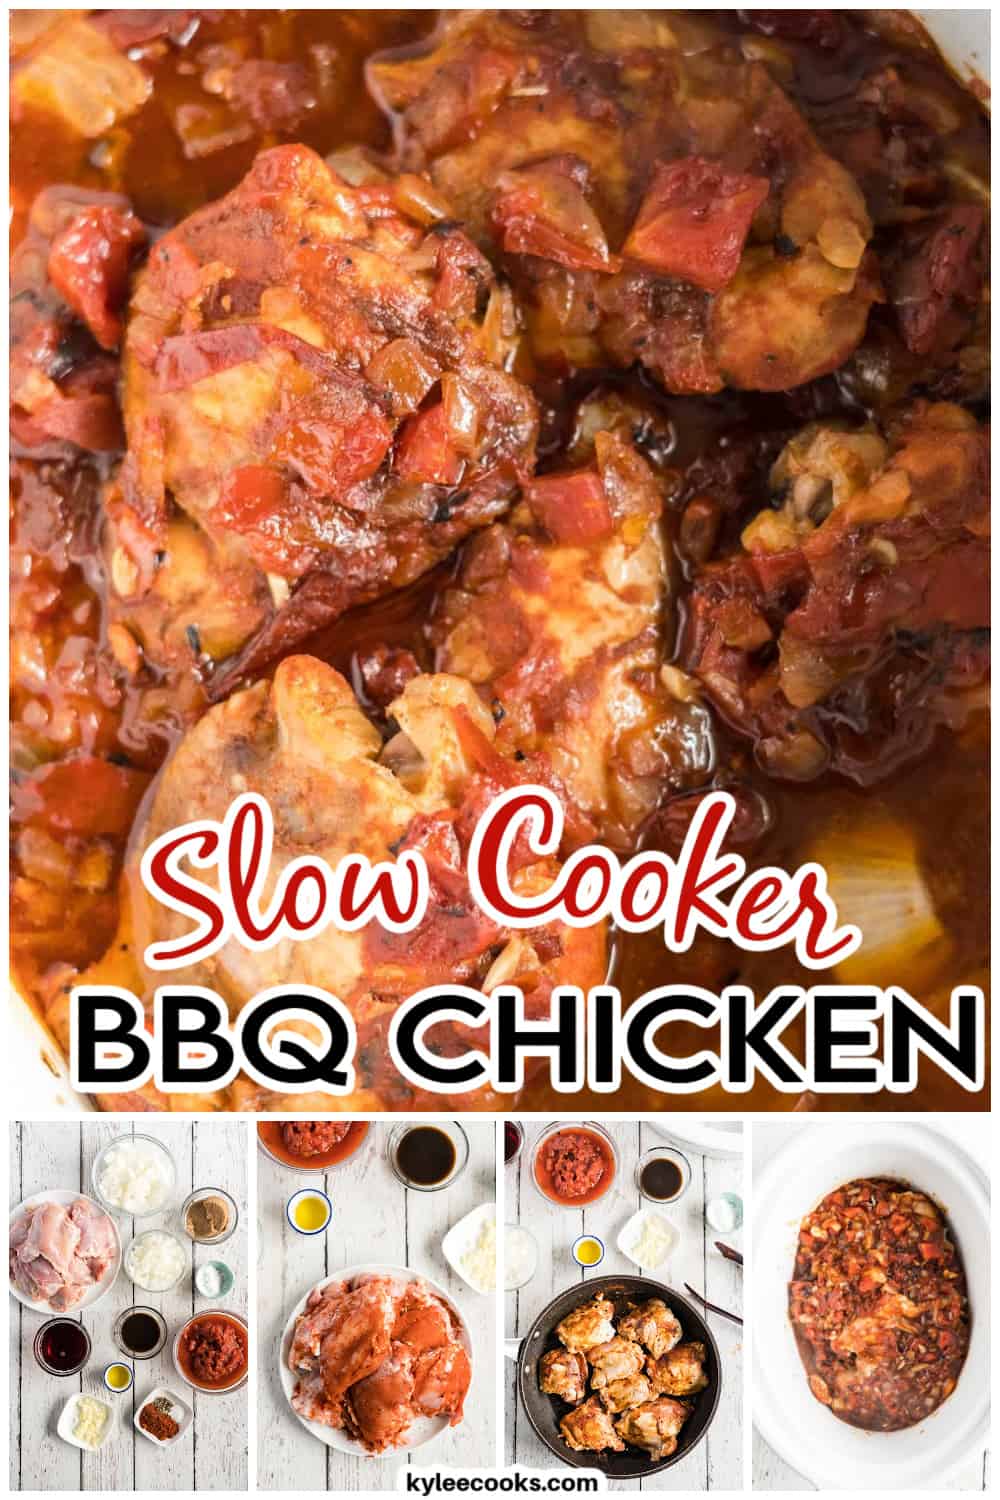 slow cooker bbq chicken thighs with recipe name overlaid in text. slow cooker bbq chicken thighs with recipe name overlaid in text.